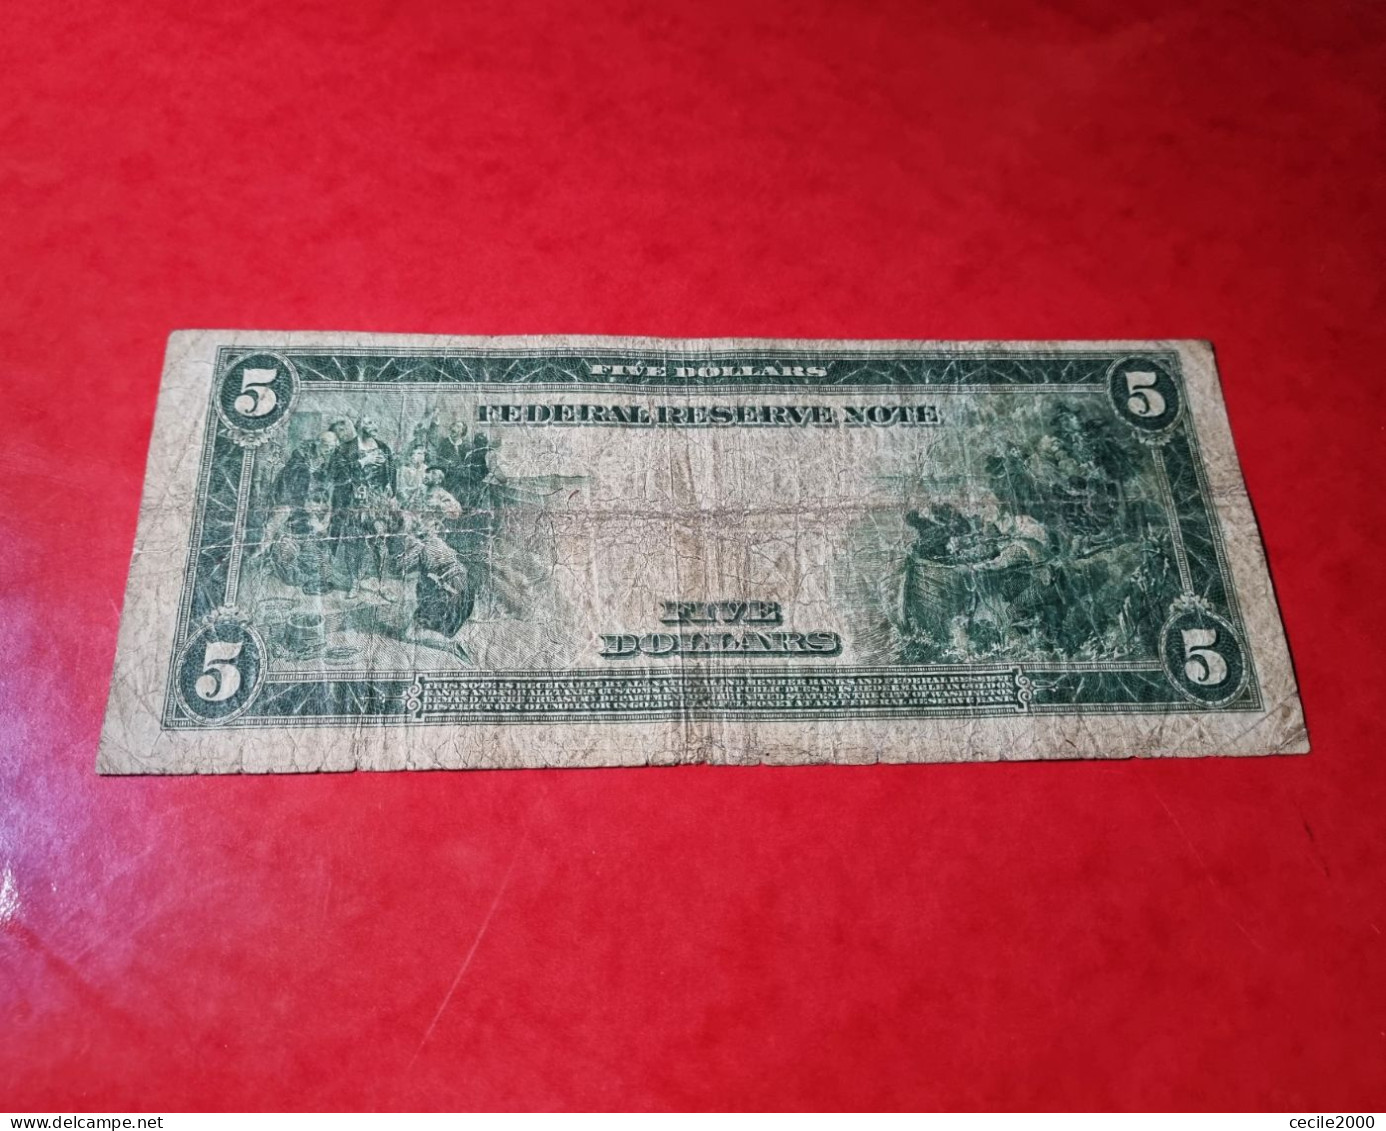 SCARCE 1914 USA $5 DOLLARS *RED SEAL* UNITED STATES BANKNOTE F BILLETE ESTADOS UNIDOS COMPRAS MULTIPLES CONSULTAR - United States Notes (1862-1923)